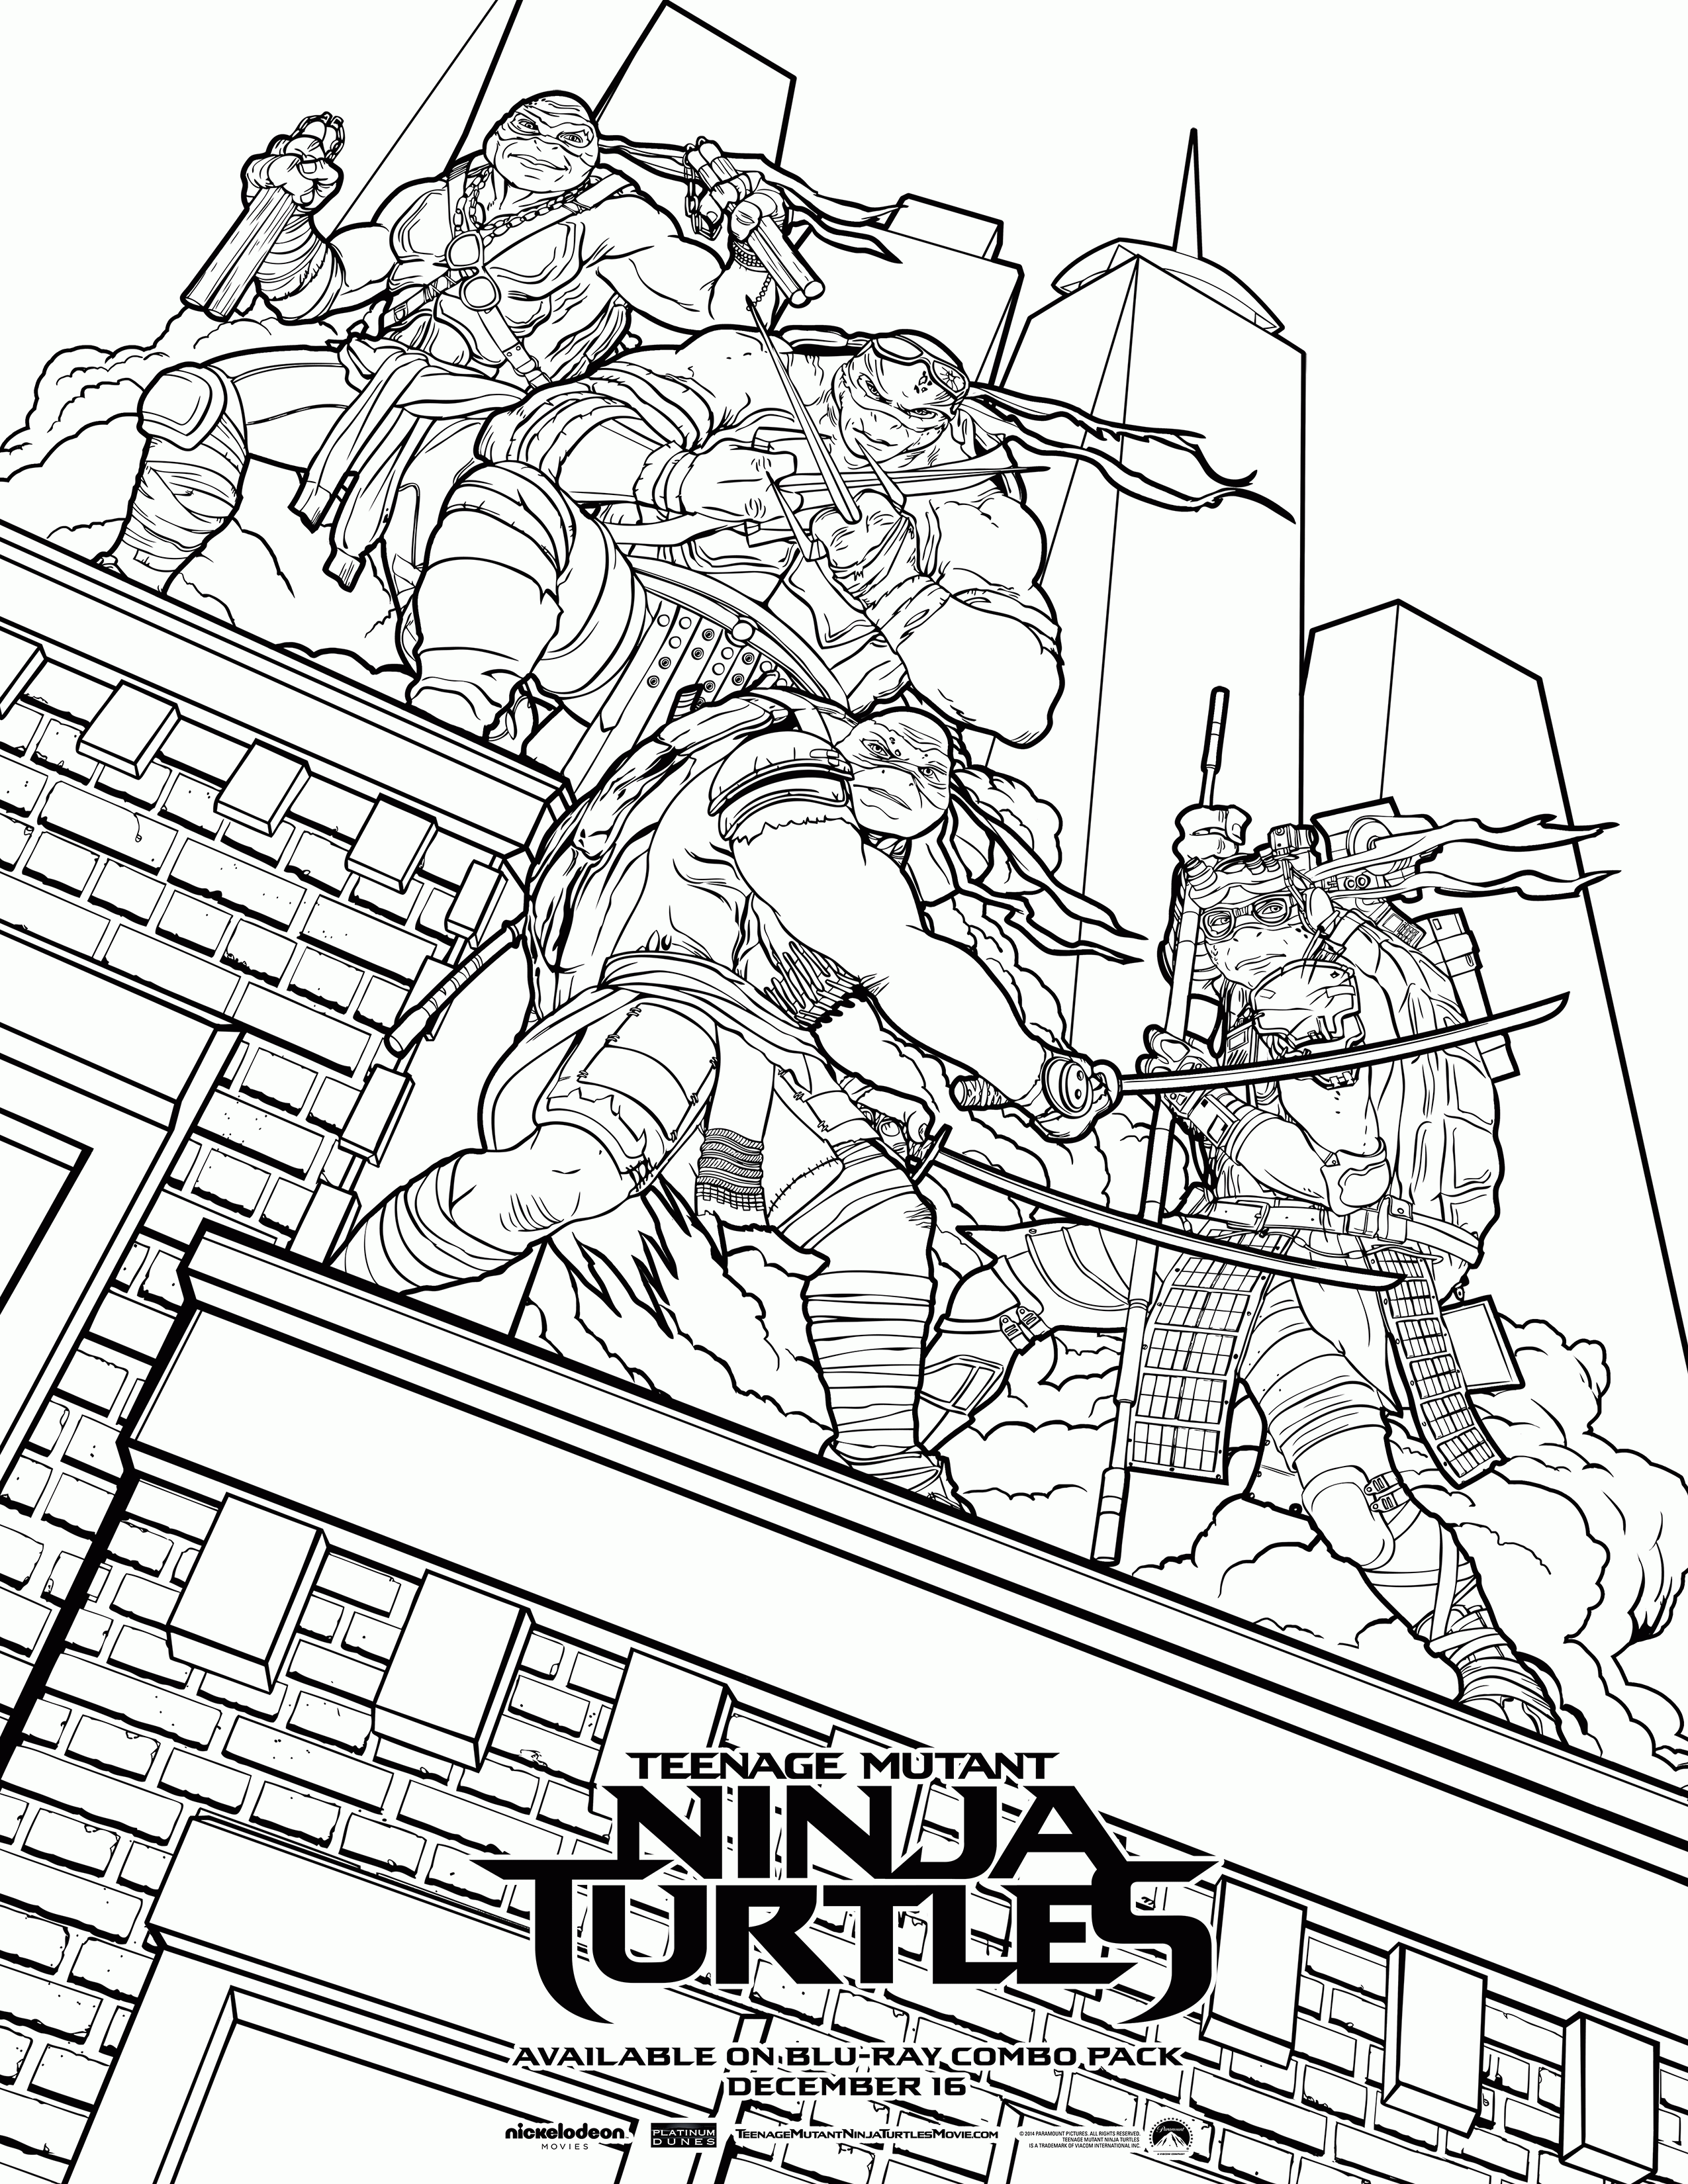 Classic Ninja Turtle Coloring Pages - Coloring Home